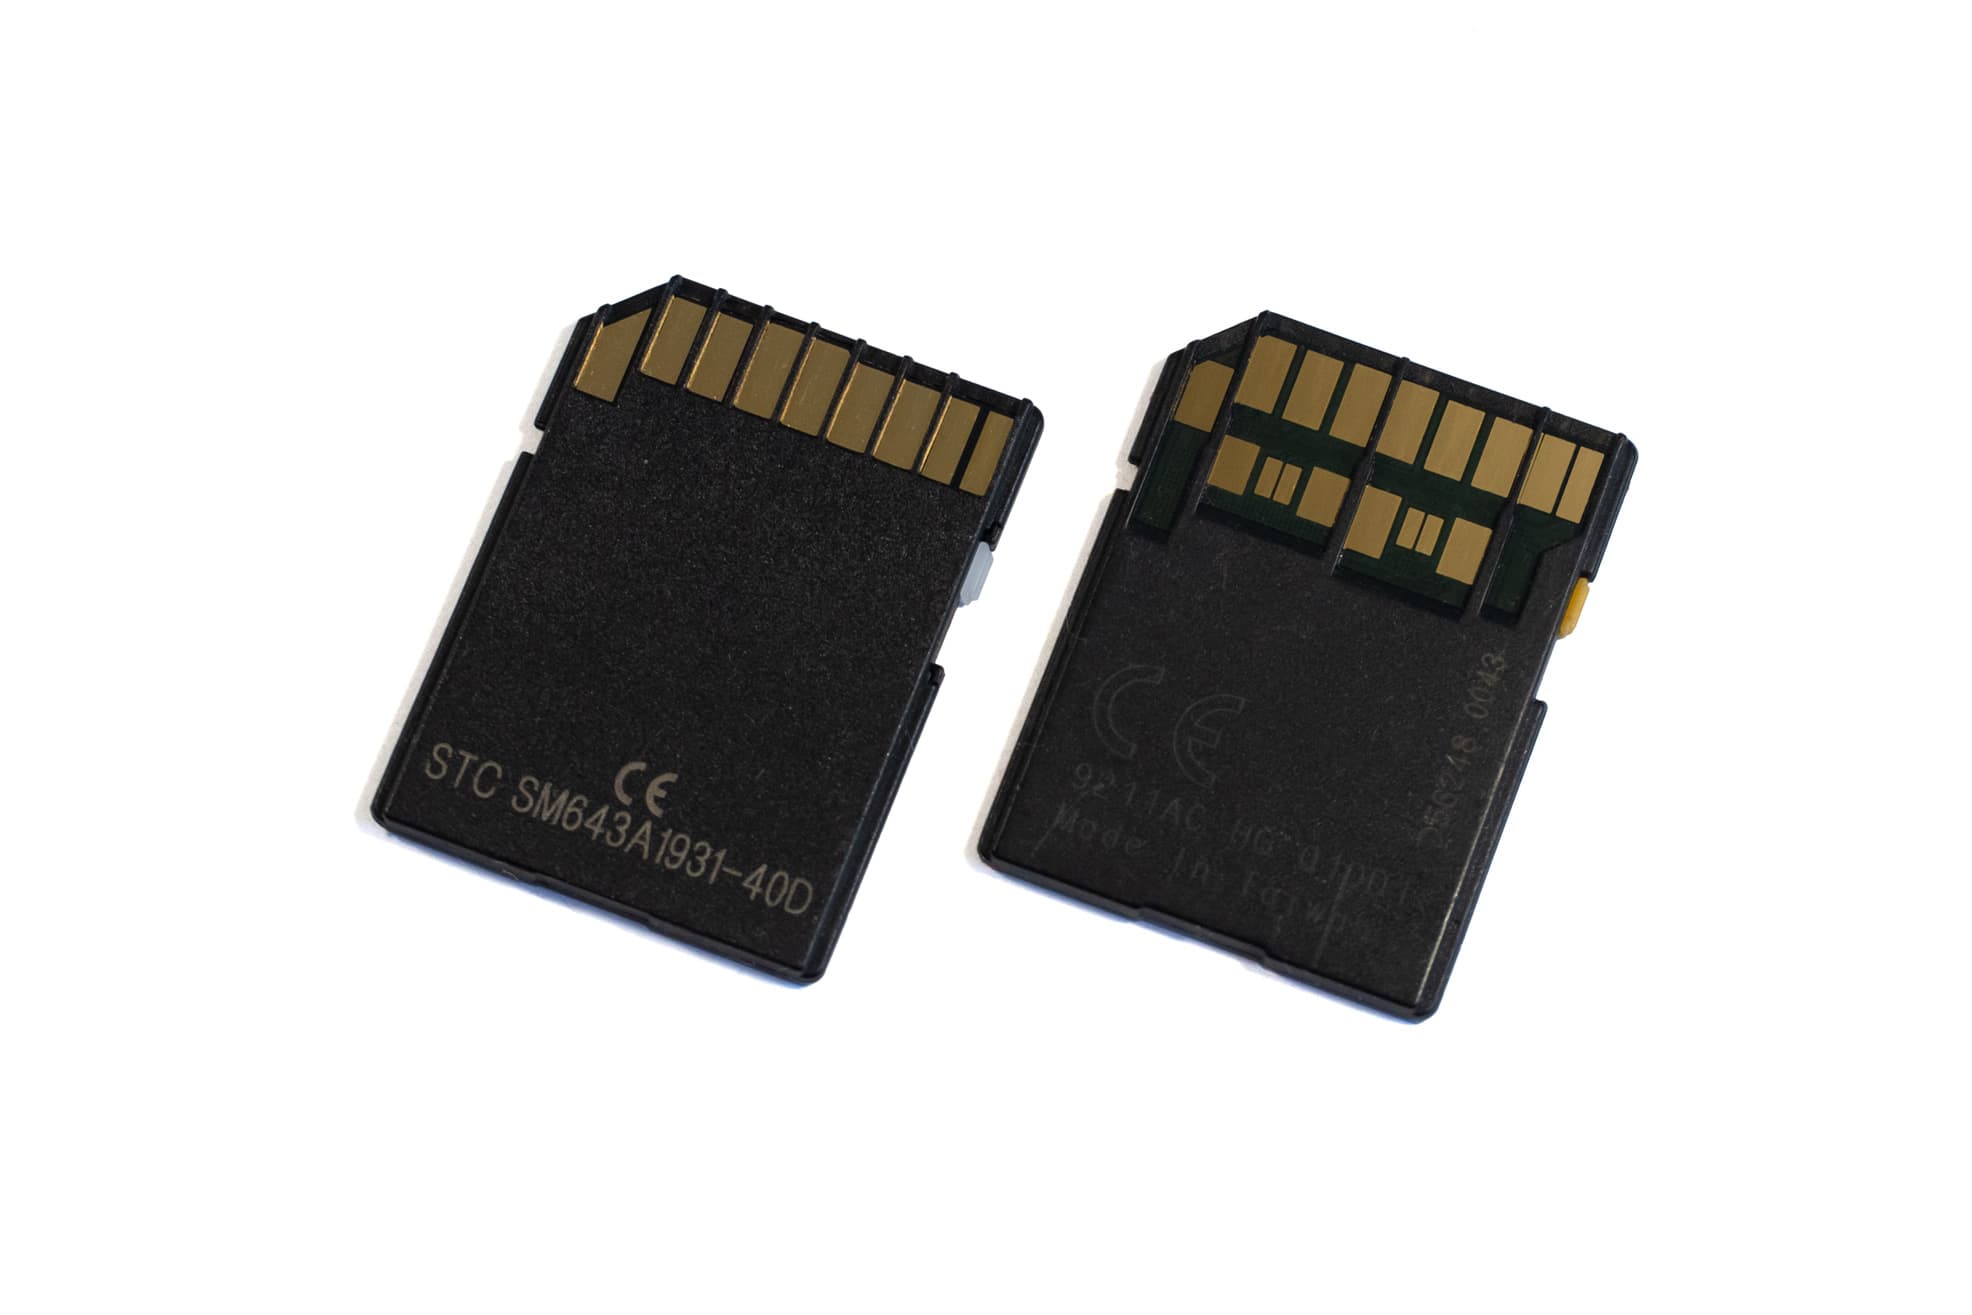 SD Cards - UHS-I next to UHS-II (right)